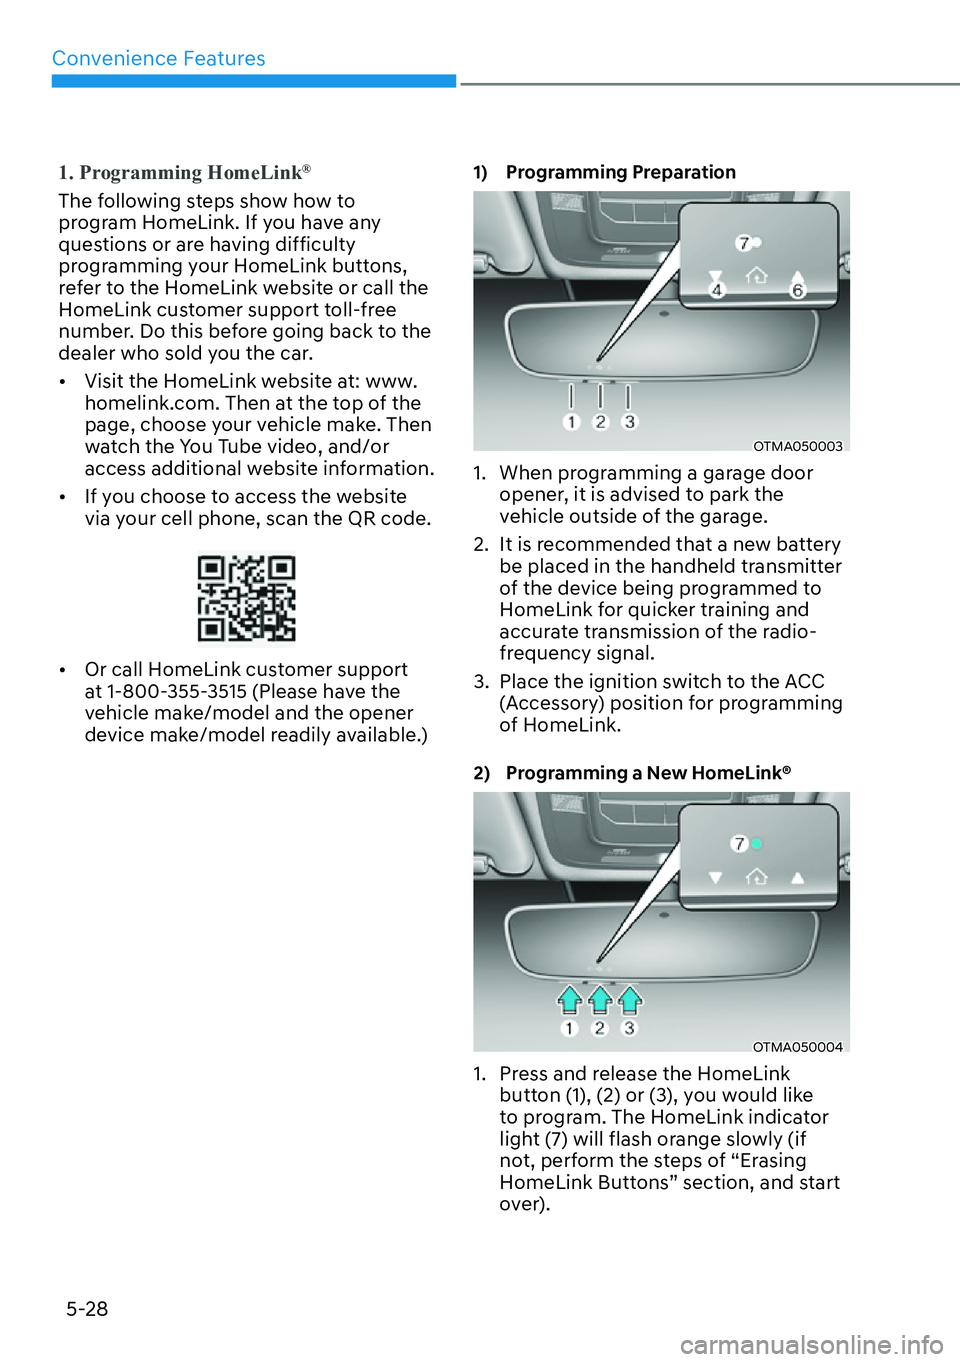 HYUNDAI SANTA FE HYBRID 2022  Owners Manual Convenience Features
5-28
1. Programming HomeLink®
The following steps show how to  
program HomeLink. If you have any 
questions or are having difficulty 
programming your HomeLink buttons, 
refer t